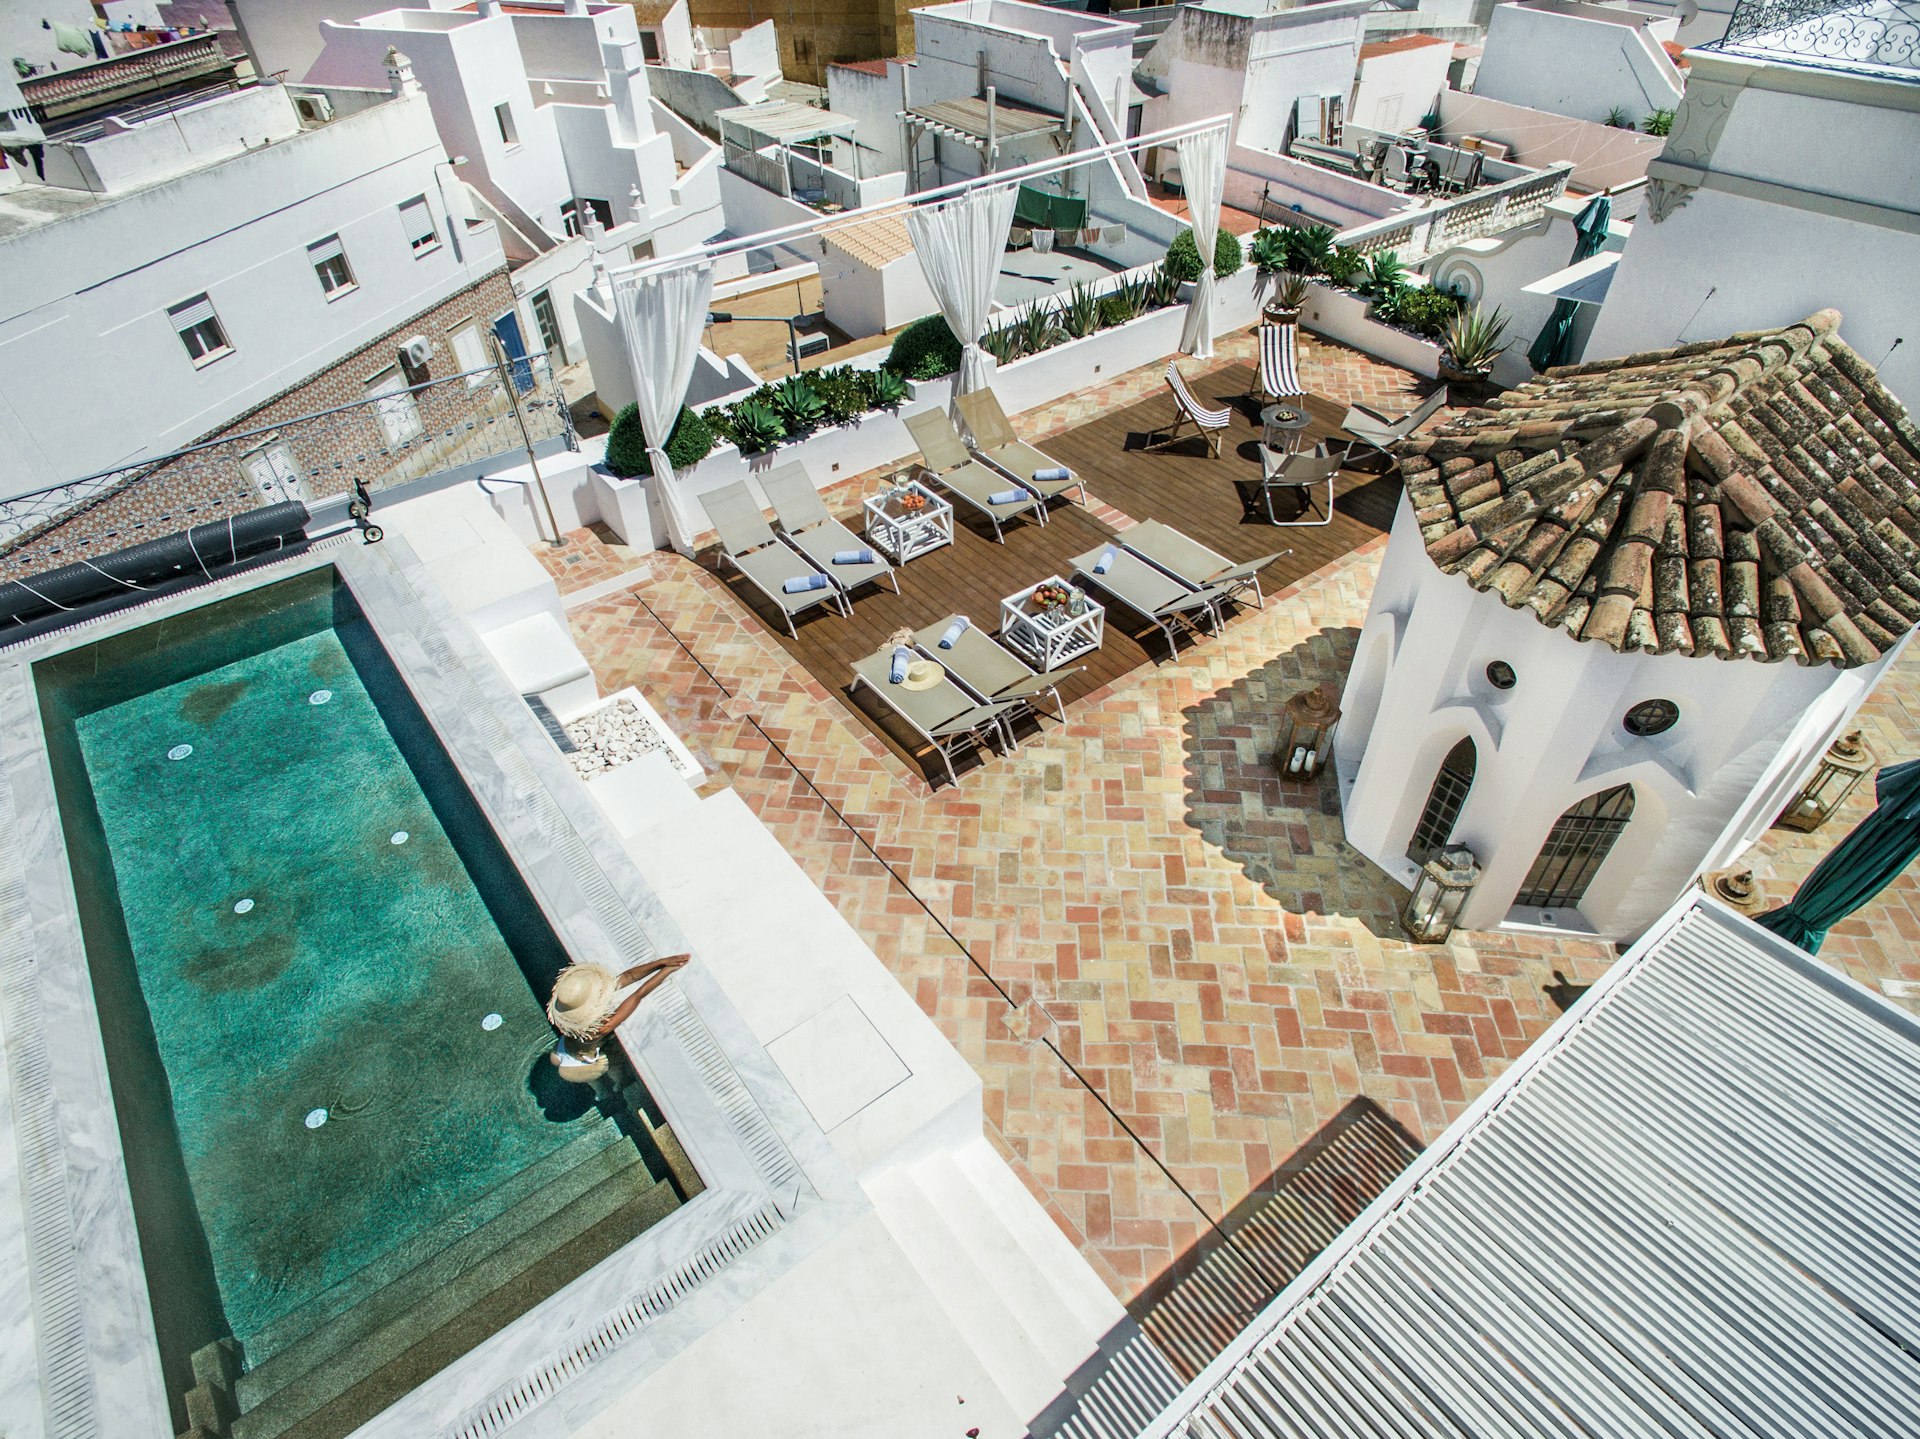 An aerial view of a rooftop terrace with a swimming pool, sun loungers and umbrellas, with the surrounding town and buildings visible in the background